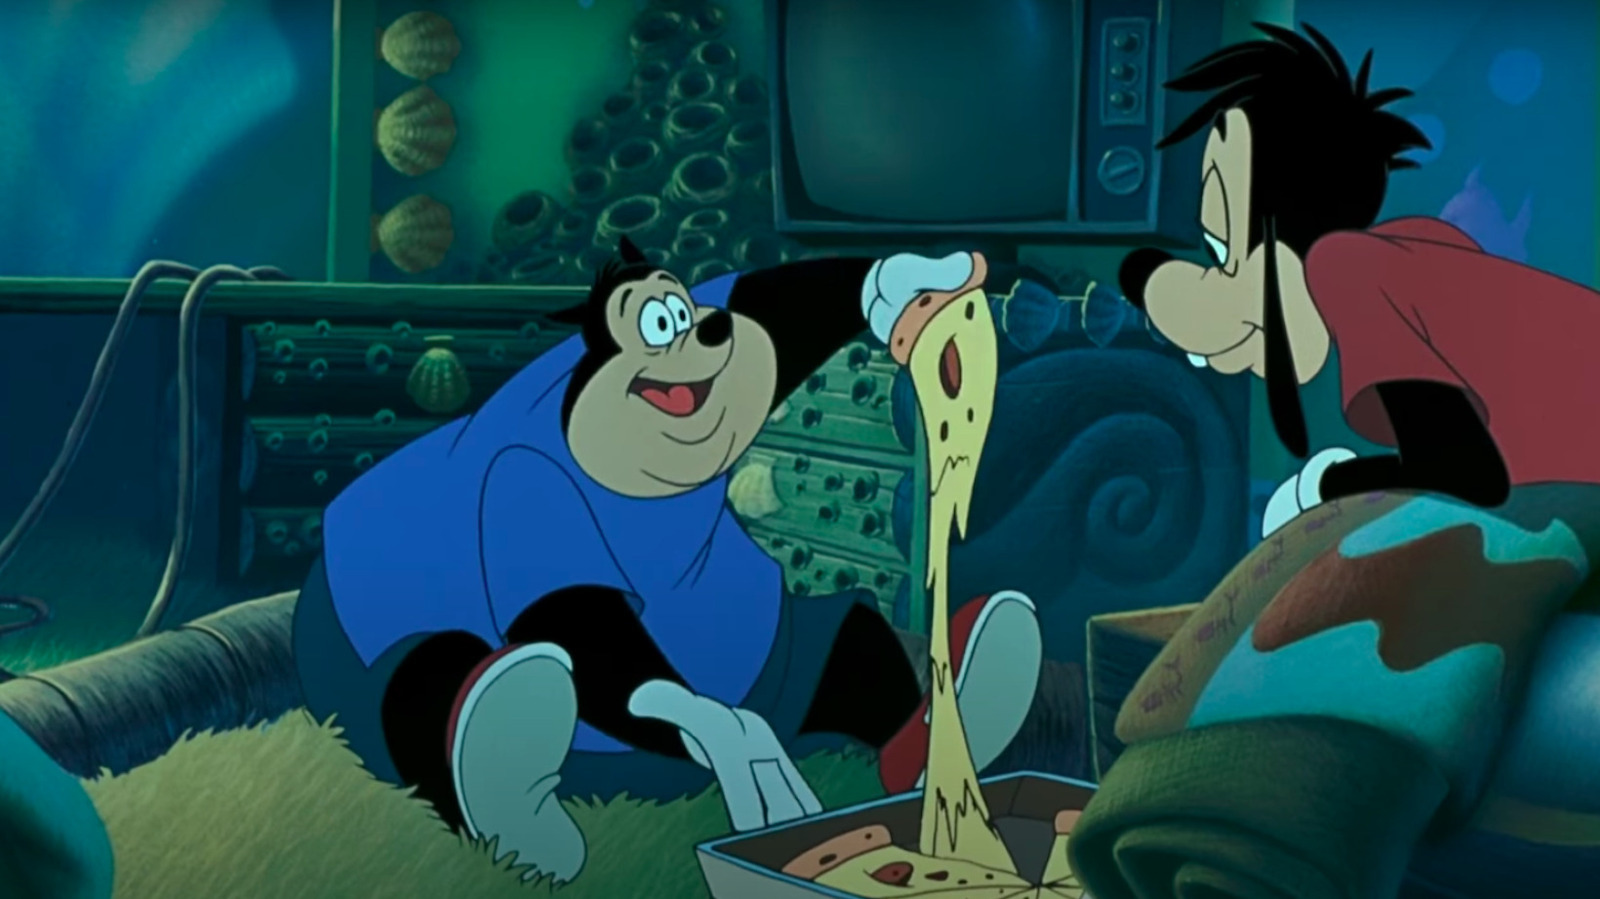 This Is Why Pizza Always Looks So Good In Cartoons